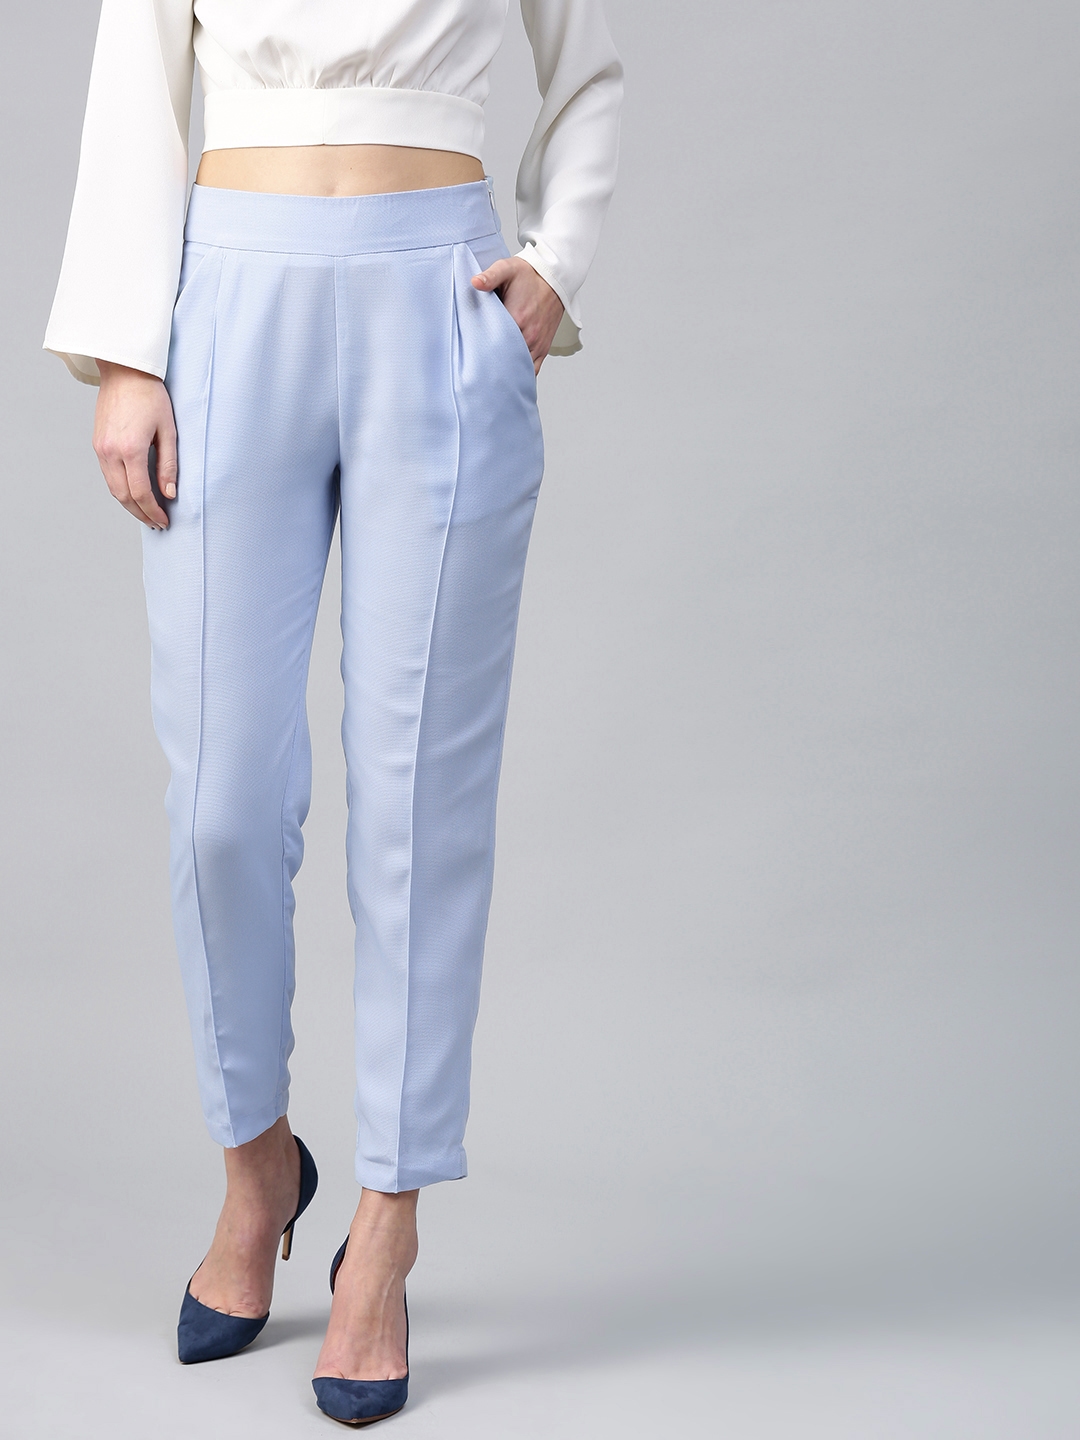 Discover more than 68 pink cigarette trousers latest - in.cdgdbentre